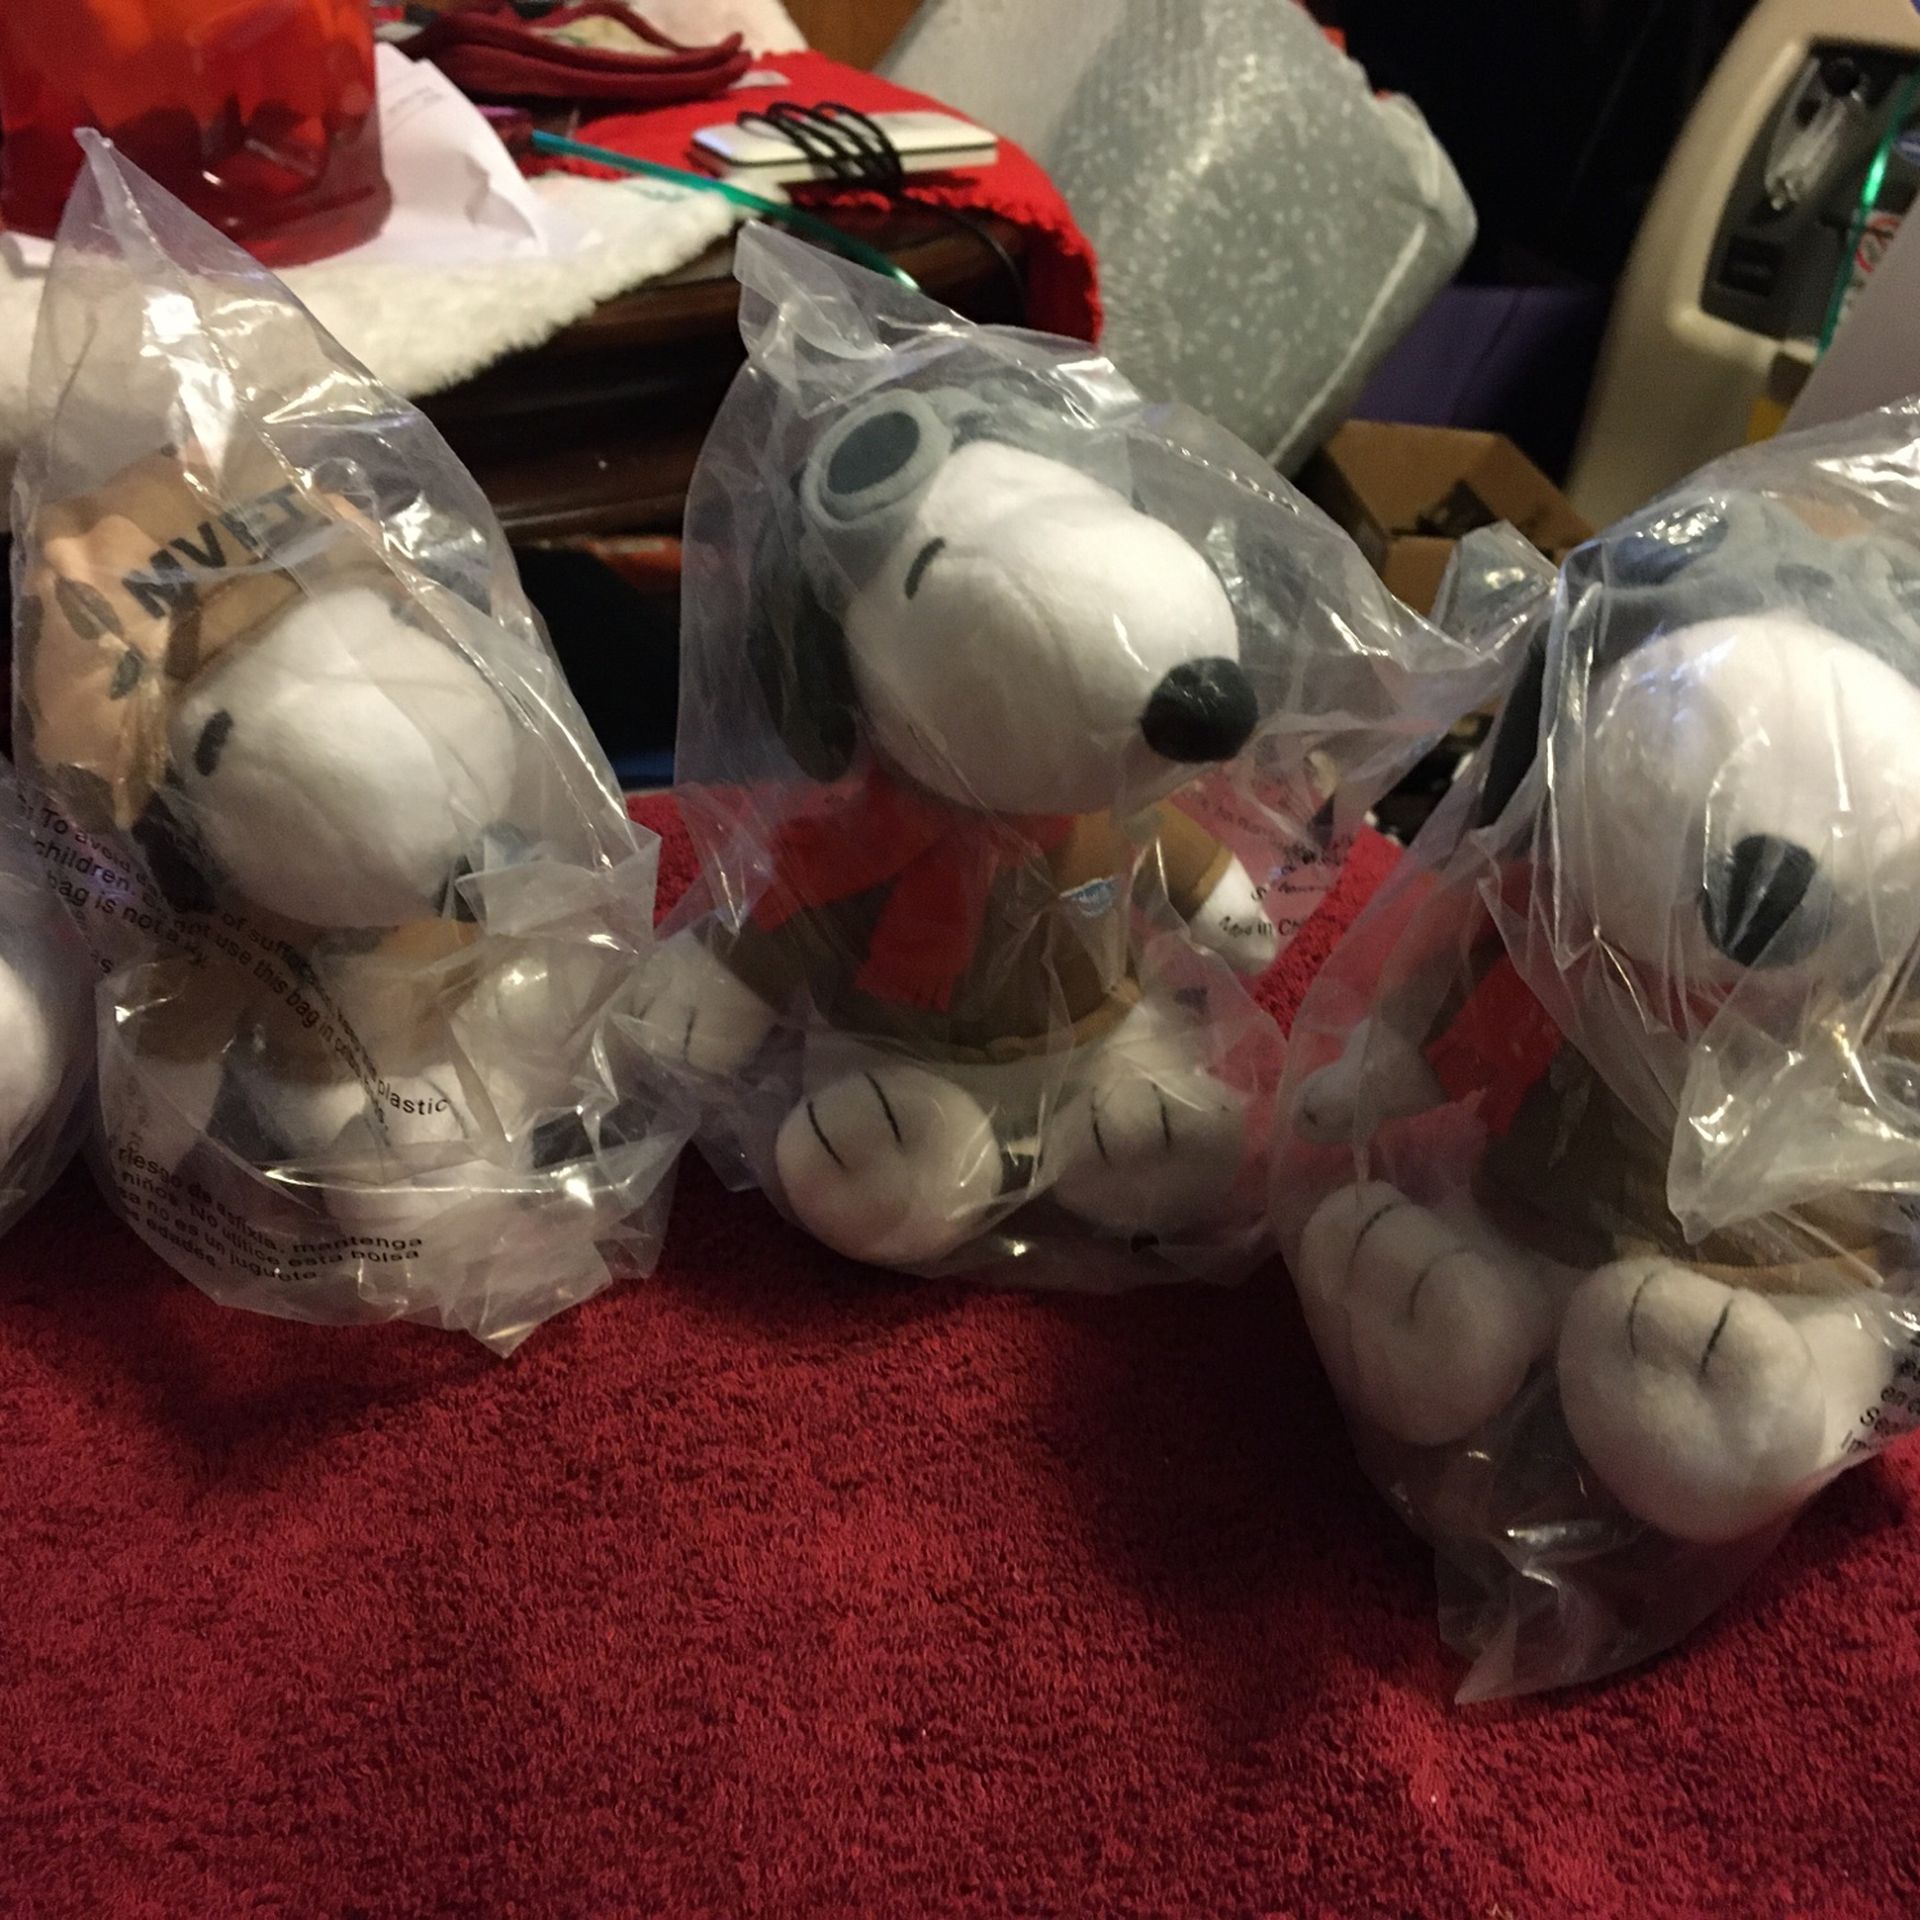 Hello Snoopy Is Ready For Flight 555 (new Never Open 4 Of Them For Jus 3.00 For All Make Good Gift Fir Some One Small